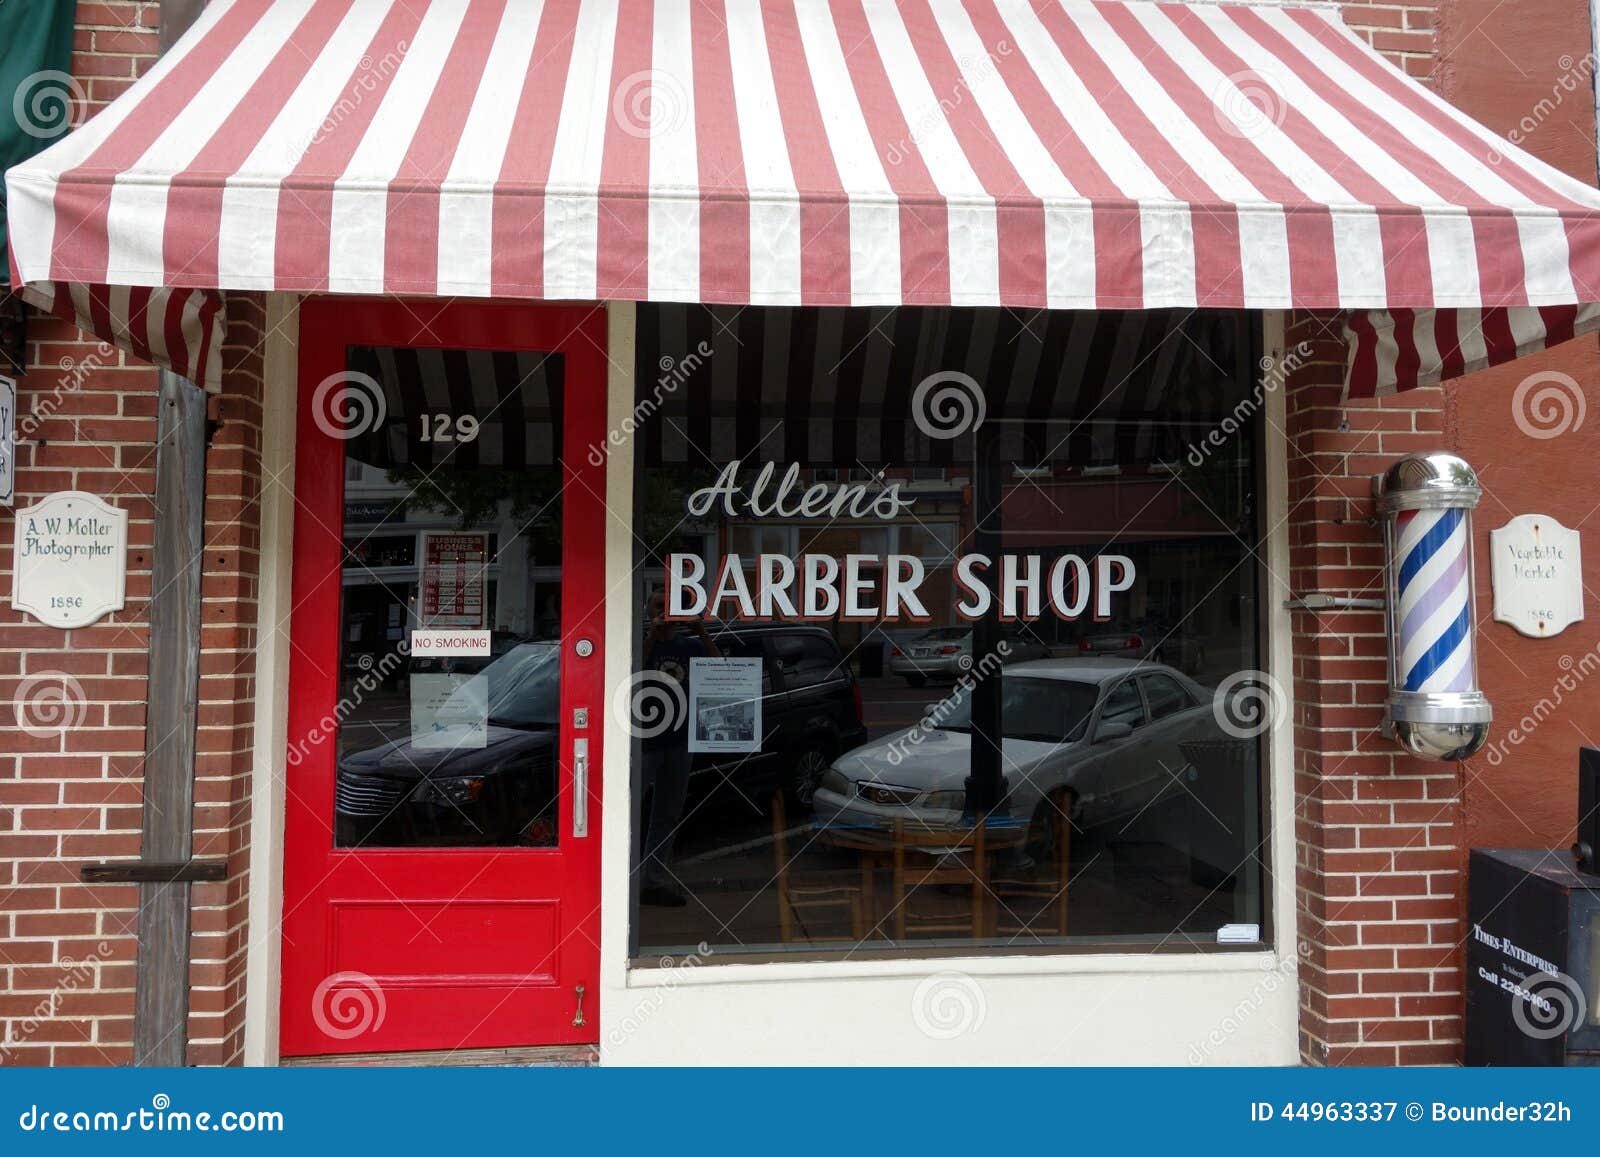 A Barber Shop At Thomasville Editorial Photography - Image: 44963337